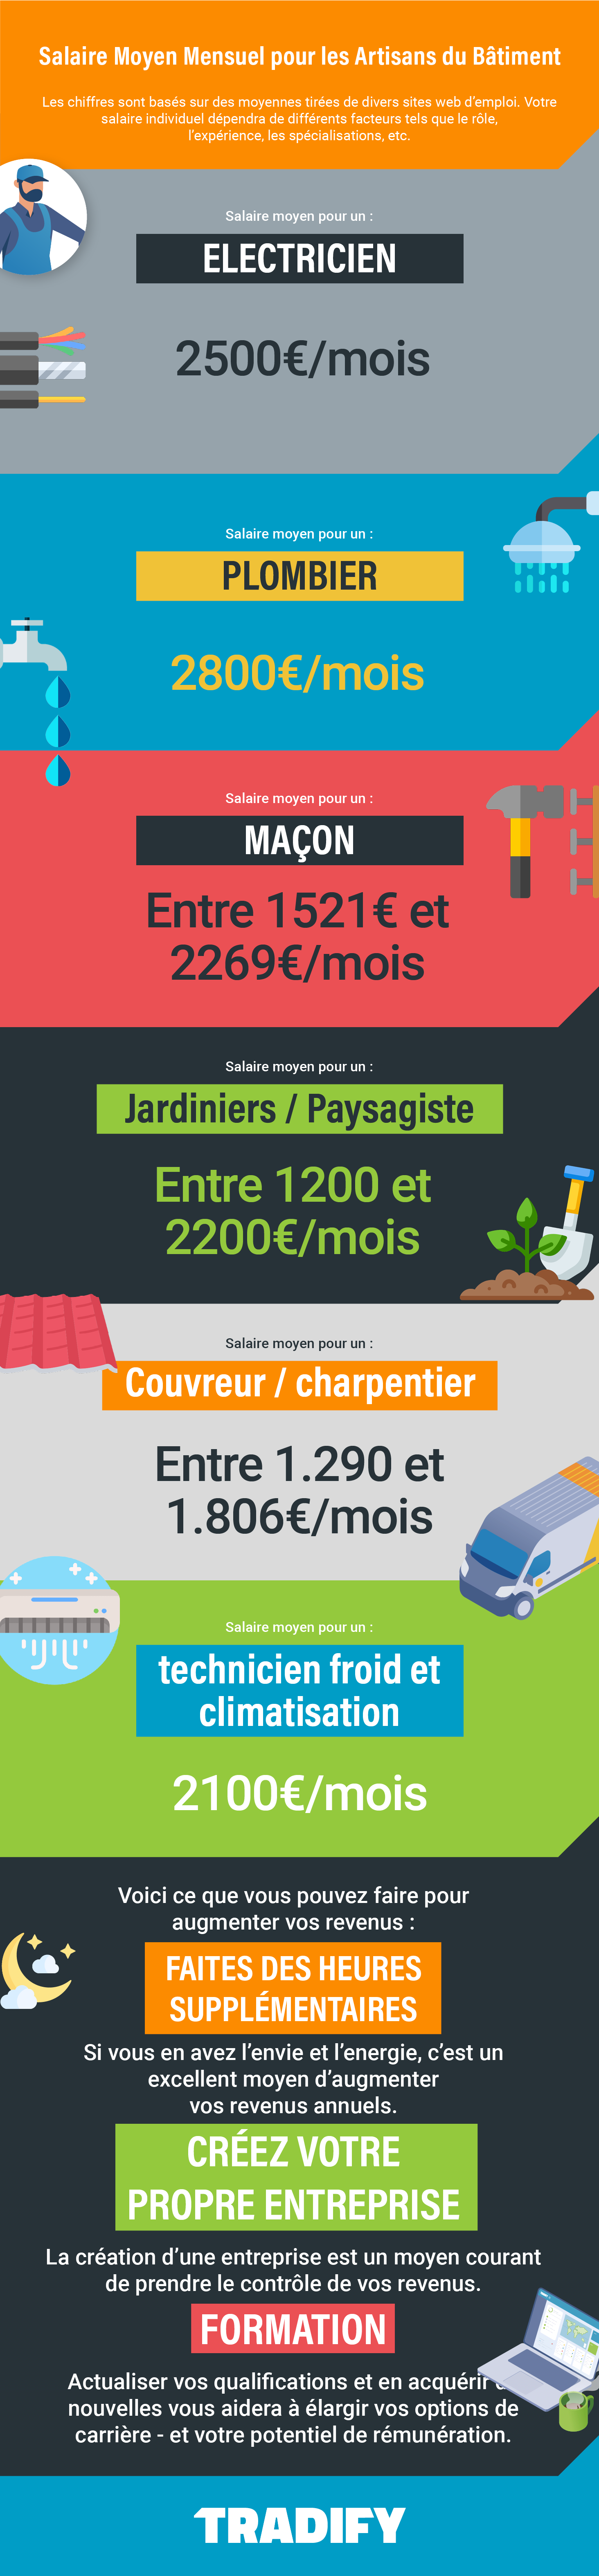 Tradify infographic - hourly rates_FR